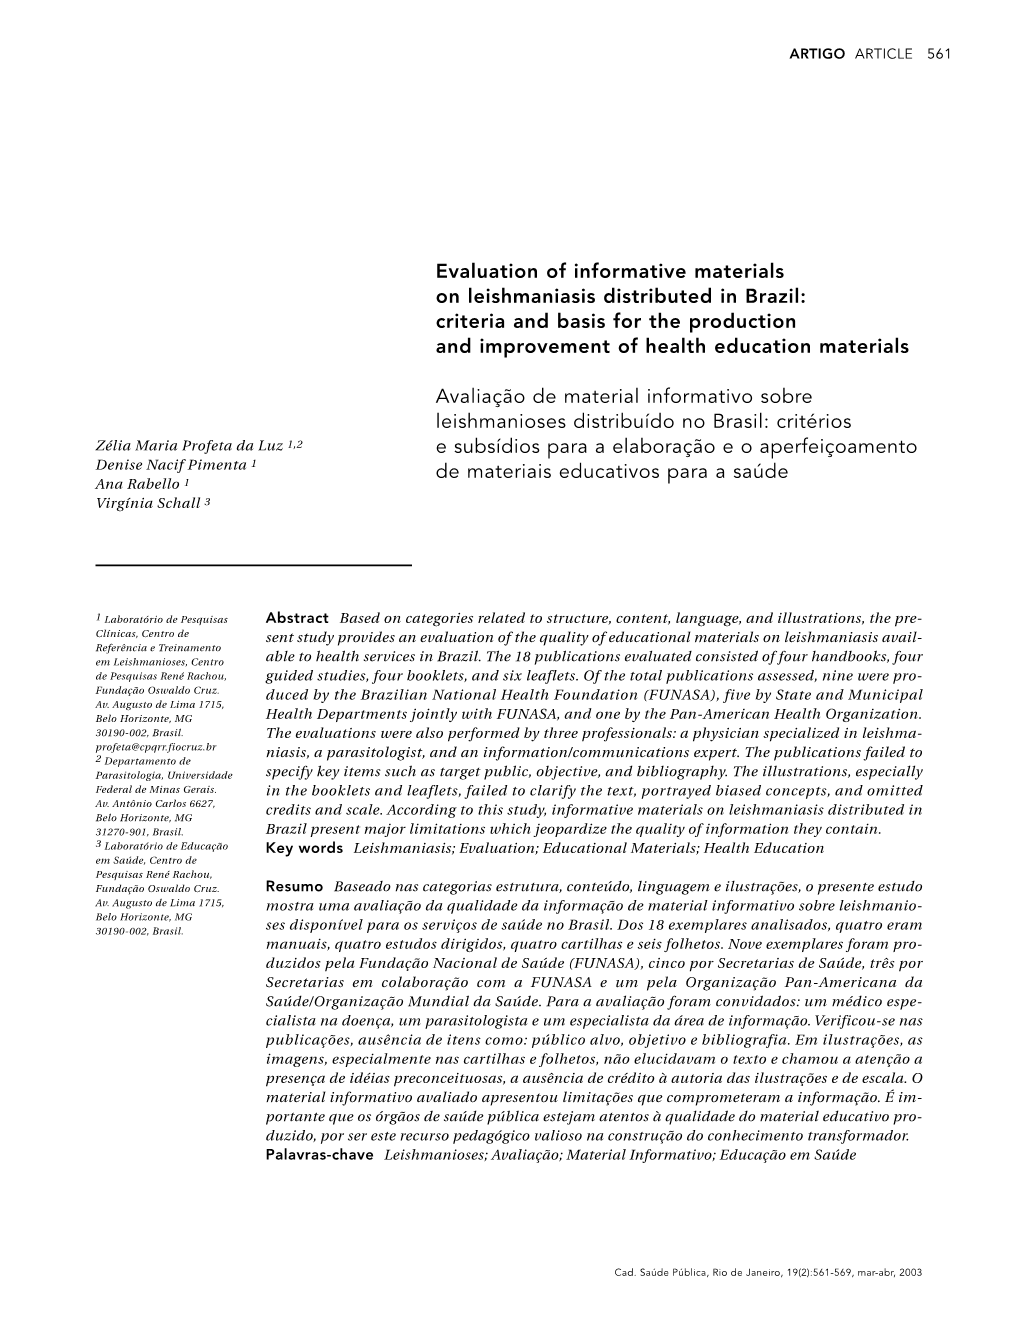 Evaluation of Informative Materials on Leishmaniasis Distributed in Brazil: Criteria and Basis for the Production and Improvement of Health Education Materials